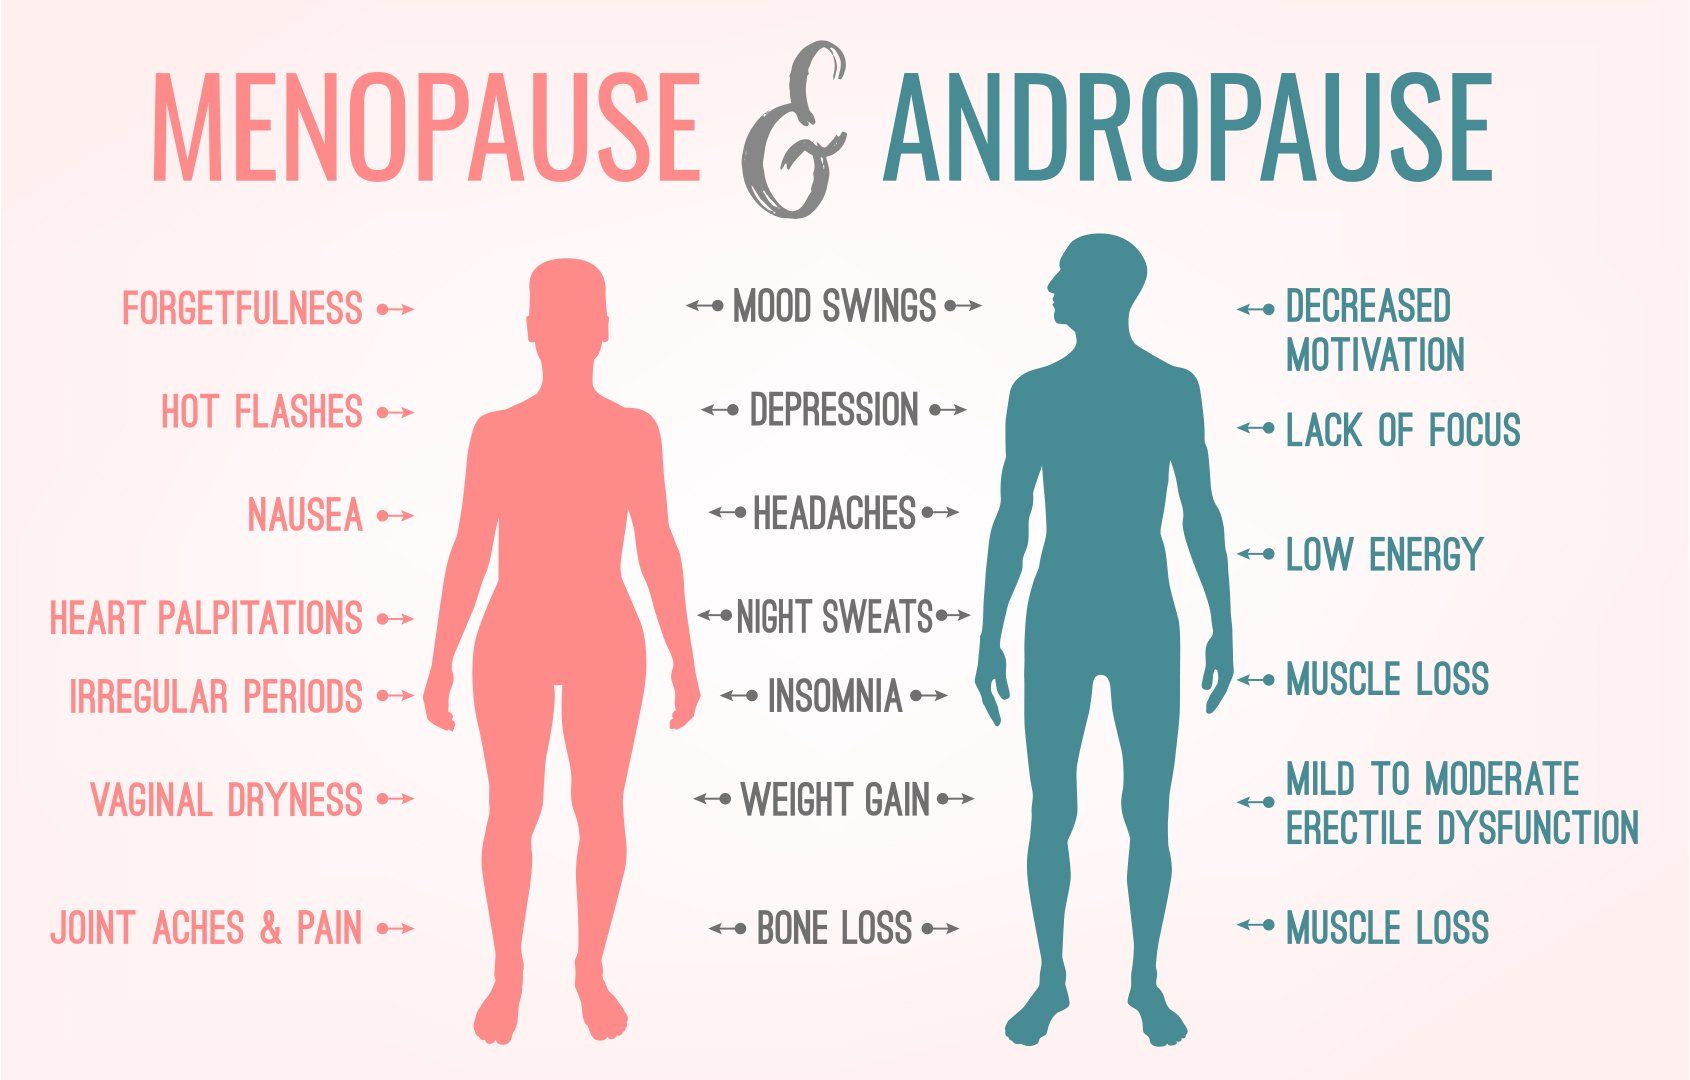 menopause & andropause diagram. symptoms of menopause: forgetfulness, hot flashes, nausea, heart palptations, irregular periods, vaginal dryness, joint aches and pain. symptoms of andropause: decreased motivation, lack of focus, low energy, muscle loss, mild to moderate erectile dysfunction, muscle loss. symptoms common to both: mood swings, depression, headaches, night sweats, insomnia, weight gain, and bone loss.